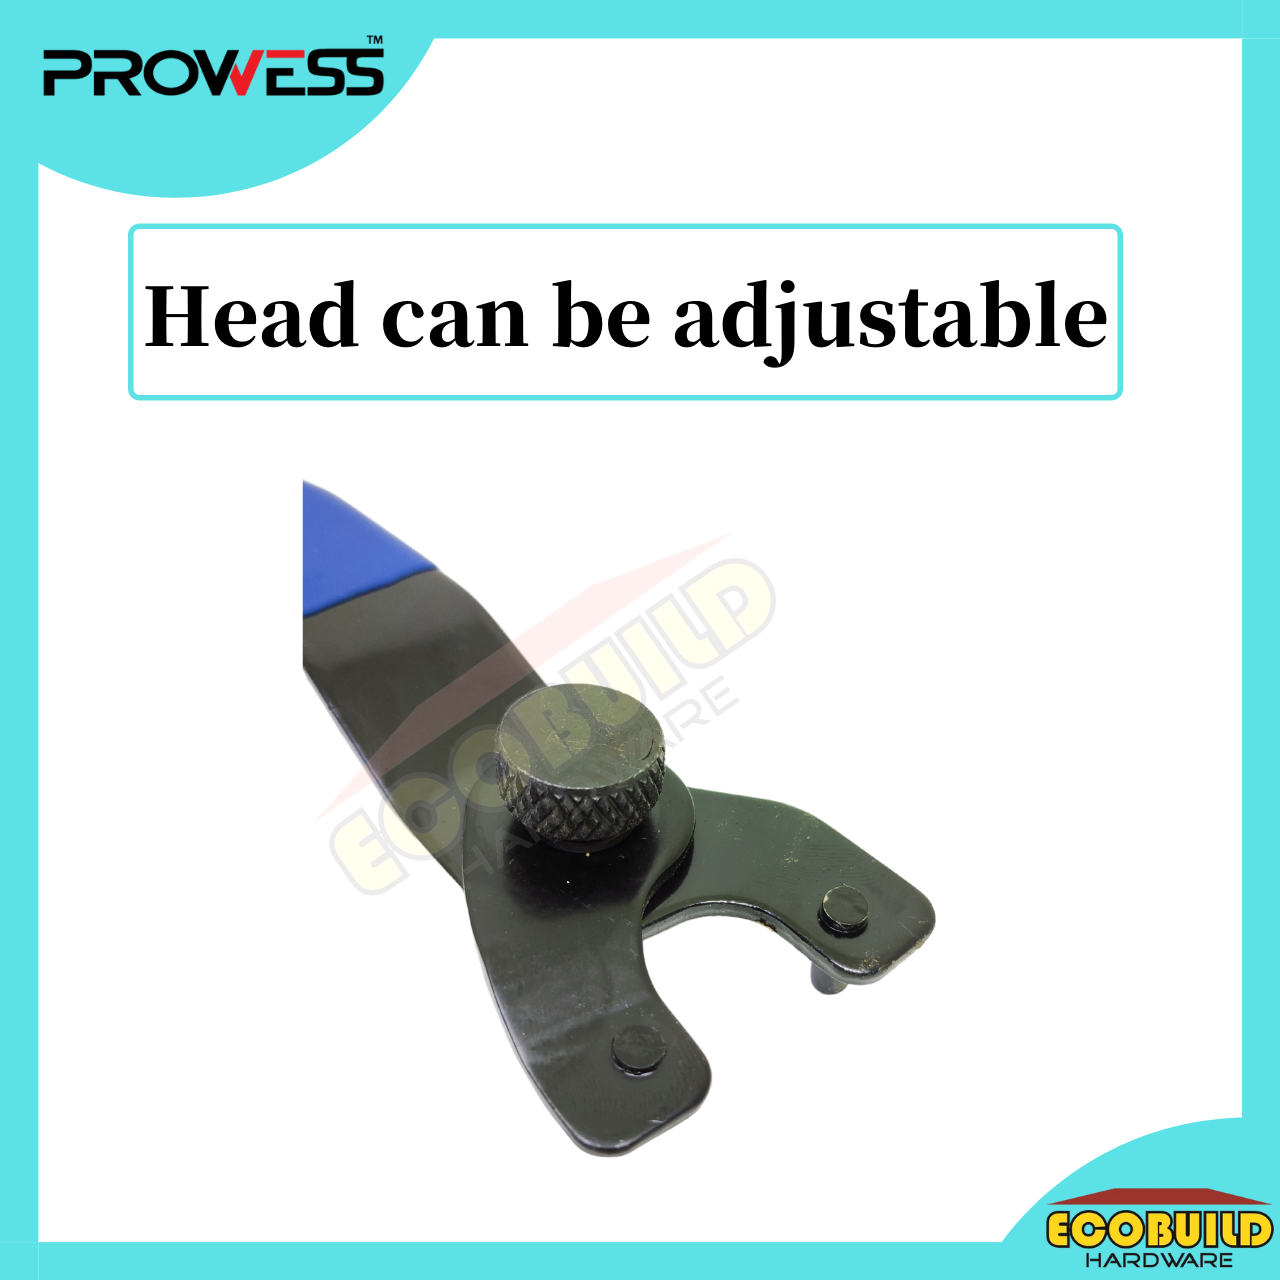 PROWESS Universal Key For Angle Grinder